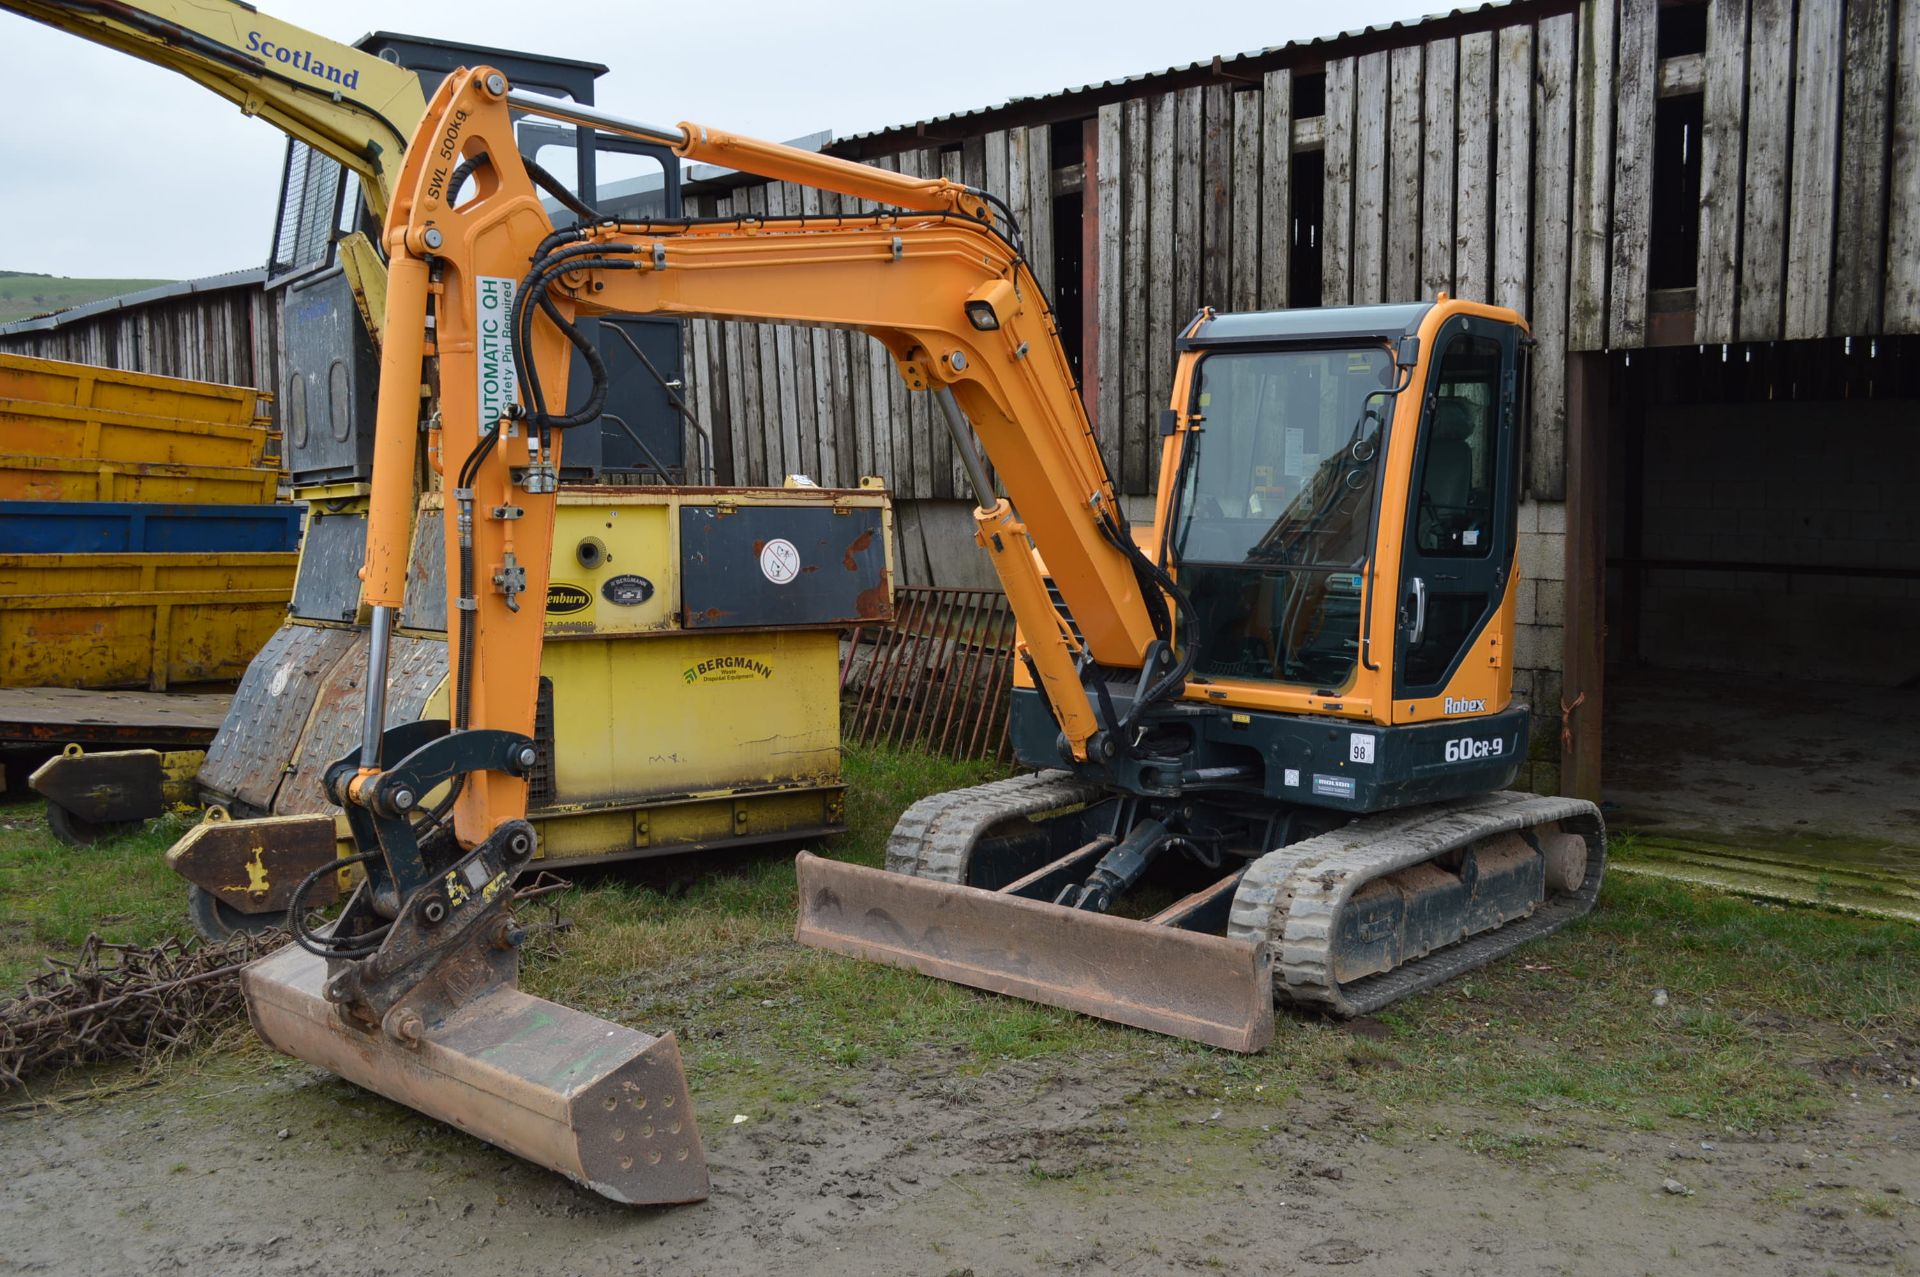 Hyundai Robex 60CR-9 TRACKED EXCAVATOR, serial no HH1HML03TB0000216, year of manufacture 2012,